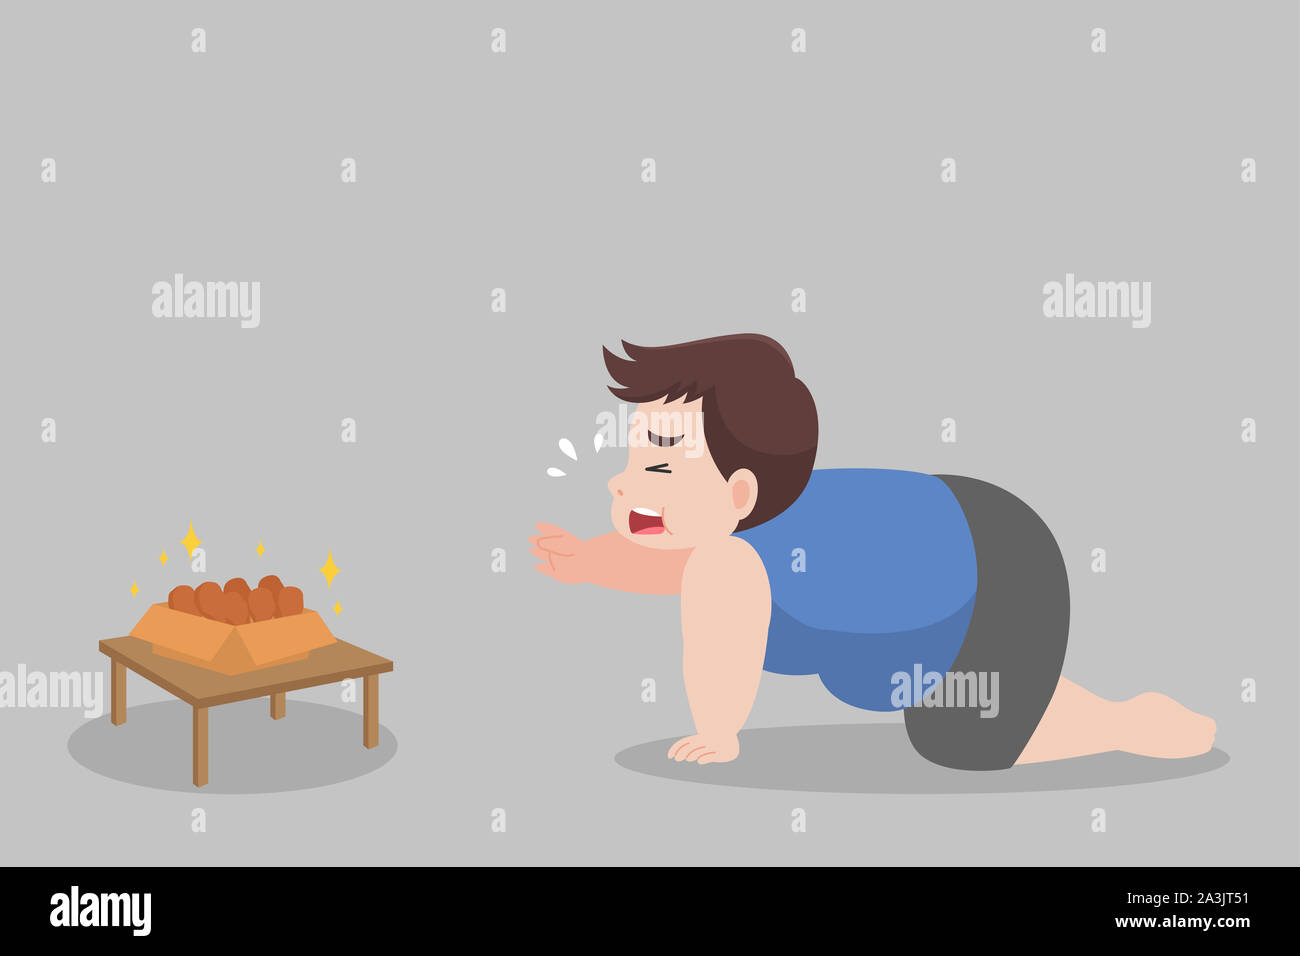 Big Fat Man hungry want to eat Chicken Drumstick,over weight, sad, afraid,  unhappy, starving, big size, diet unhealthy cartoon, lose weight, Lifestyle  Stock Photo - Alamy